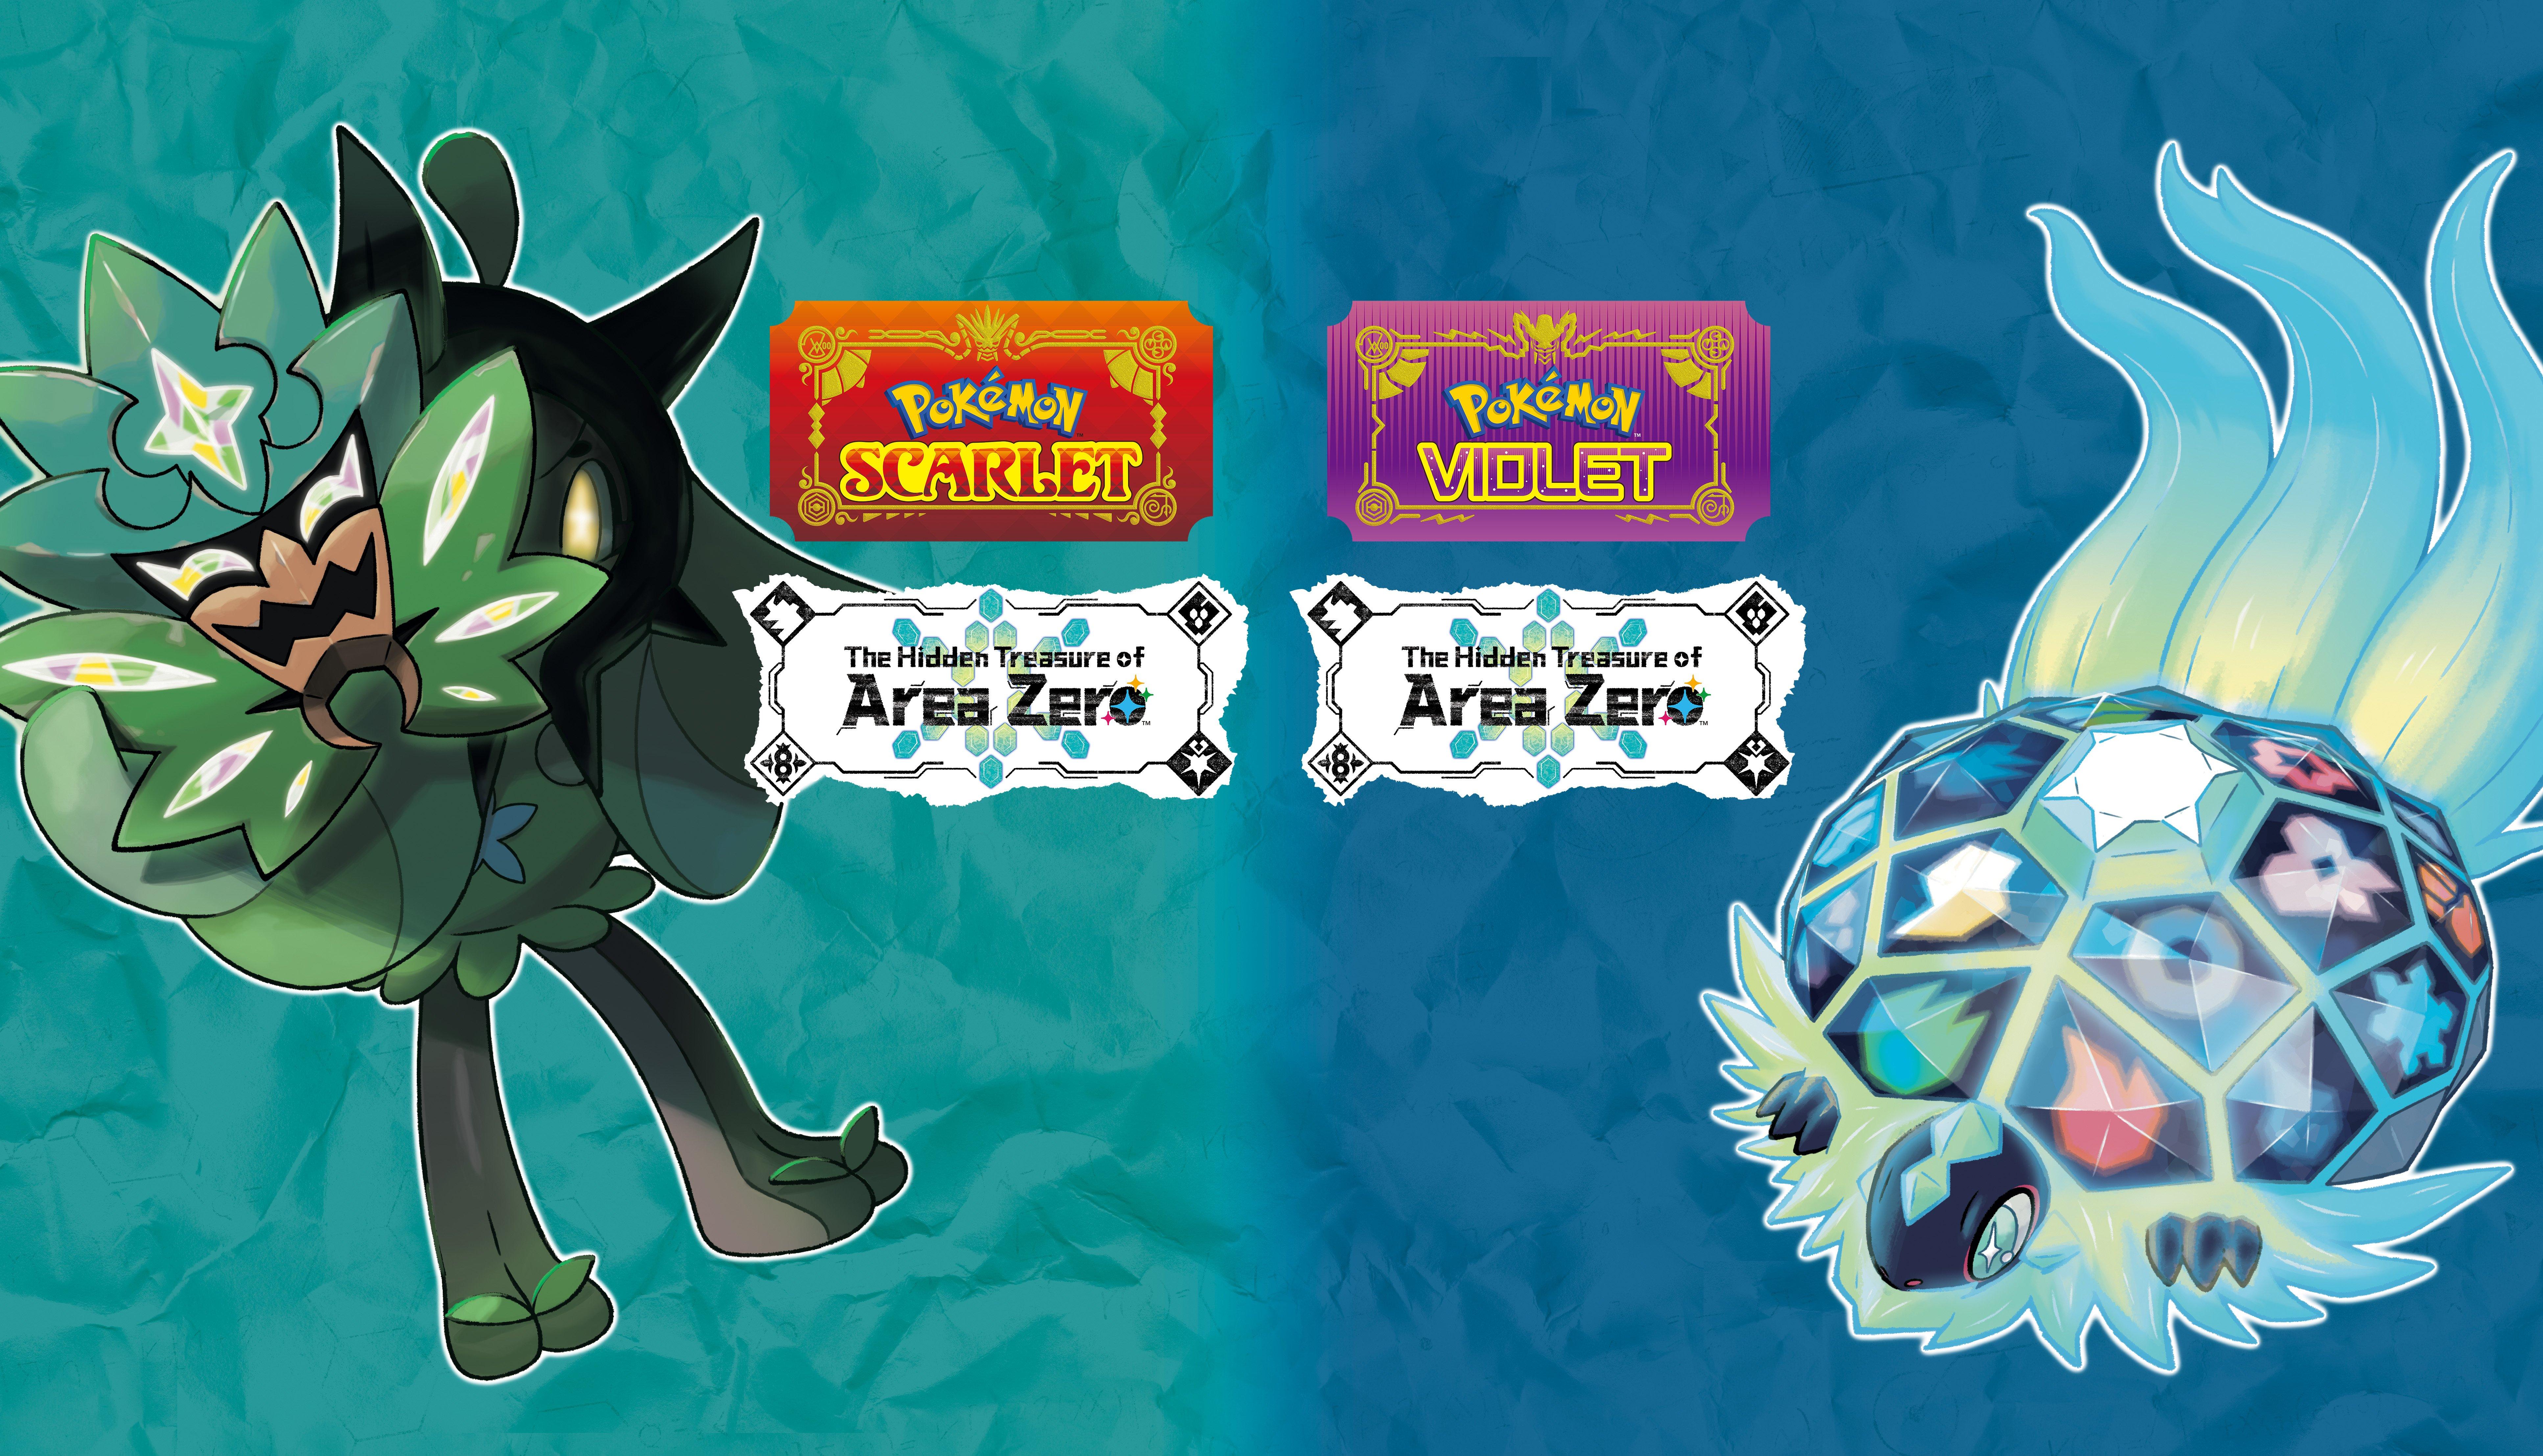 Pokemon Scarlet and Violet Expansion Pass: The Hidden Treasure of Area Zero - Nintendo Switch